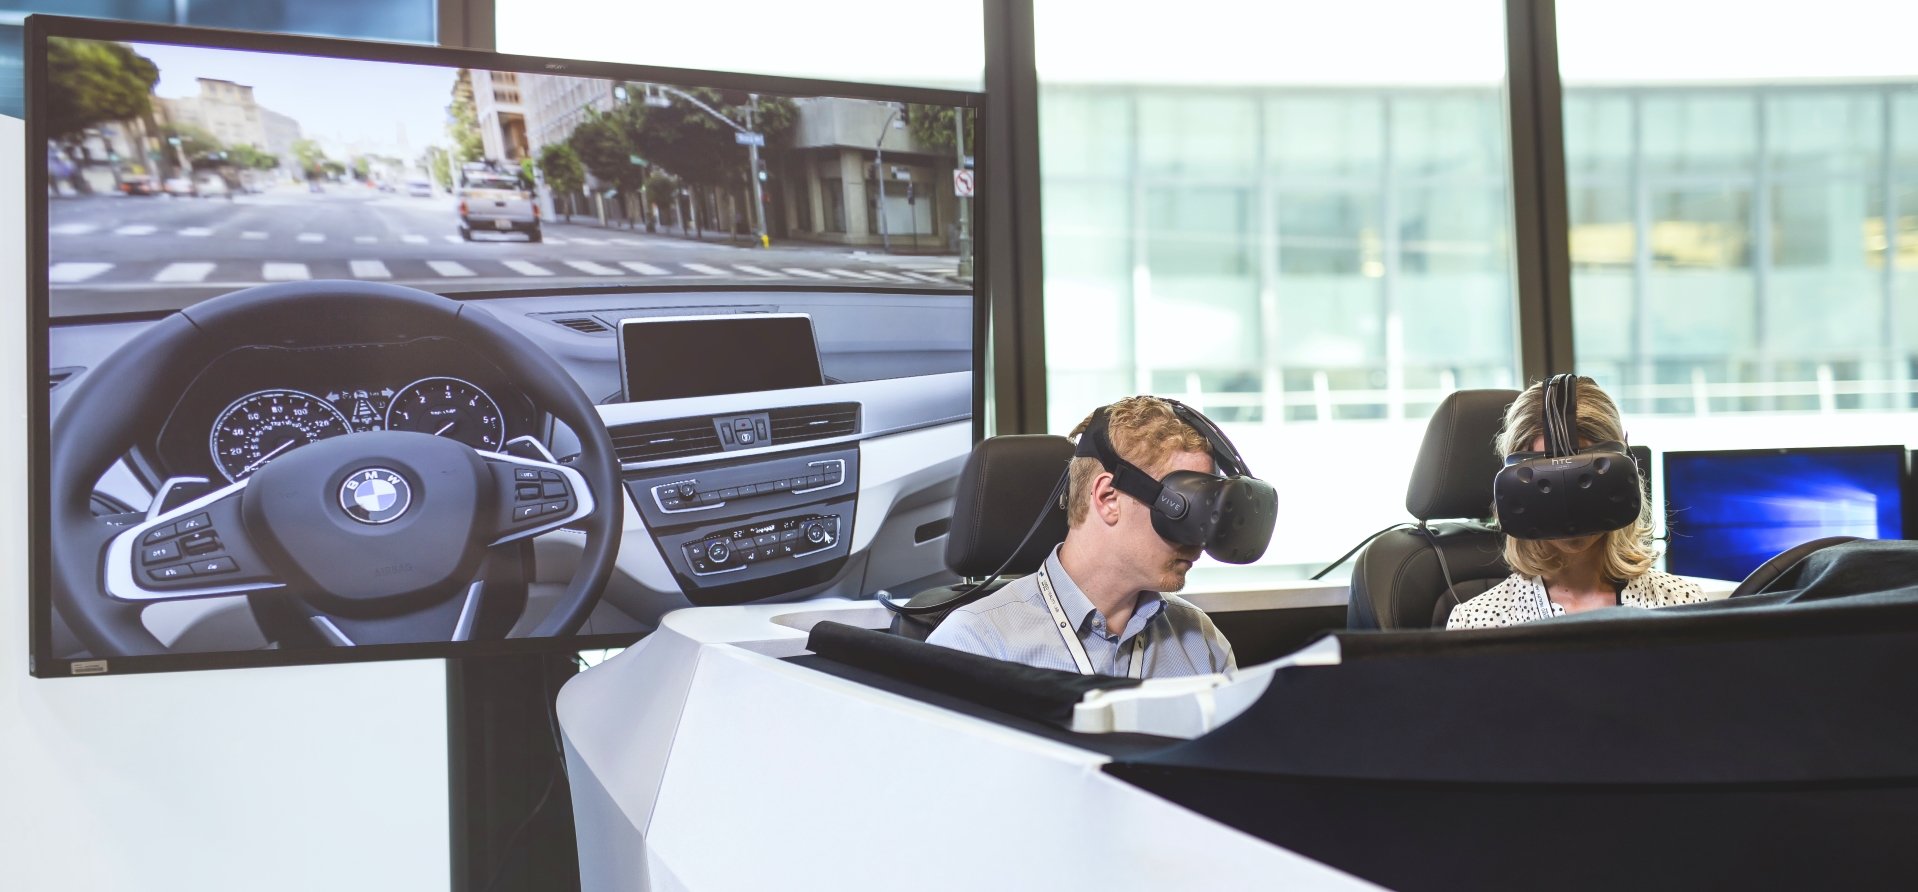 BMW Accelerates VR Usage with HTC Vive